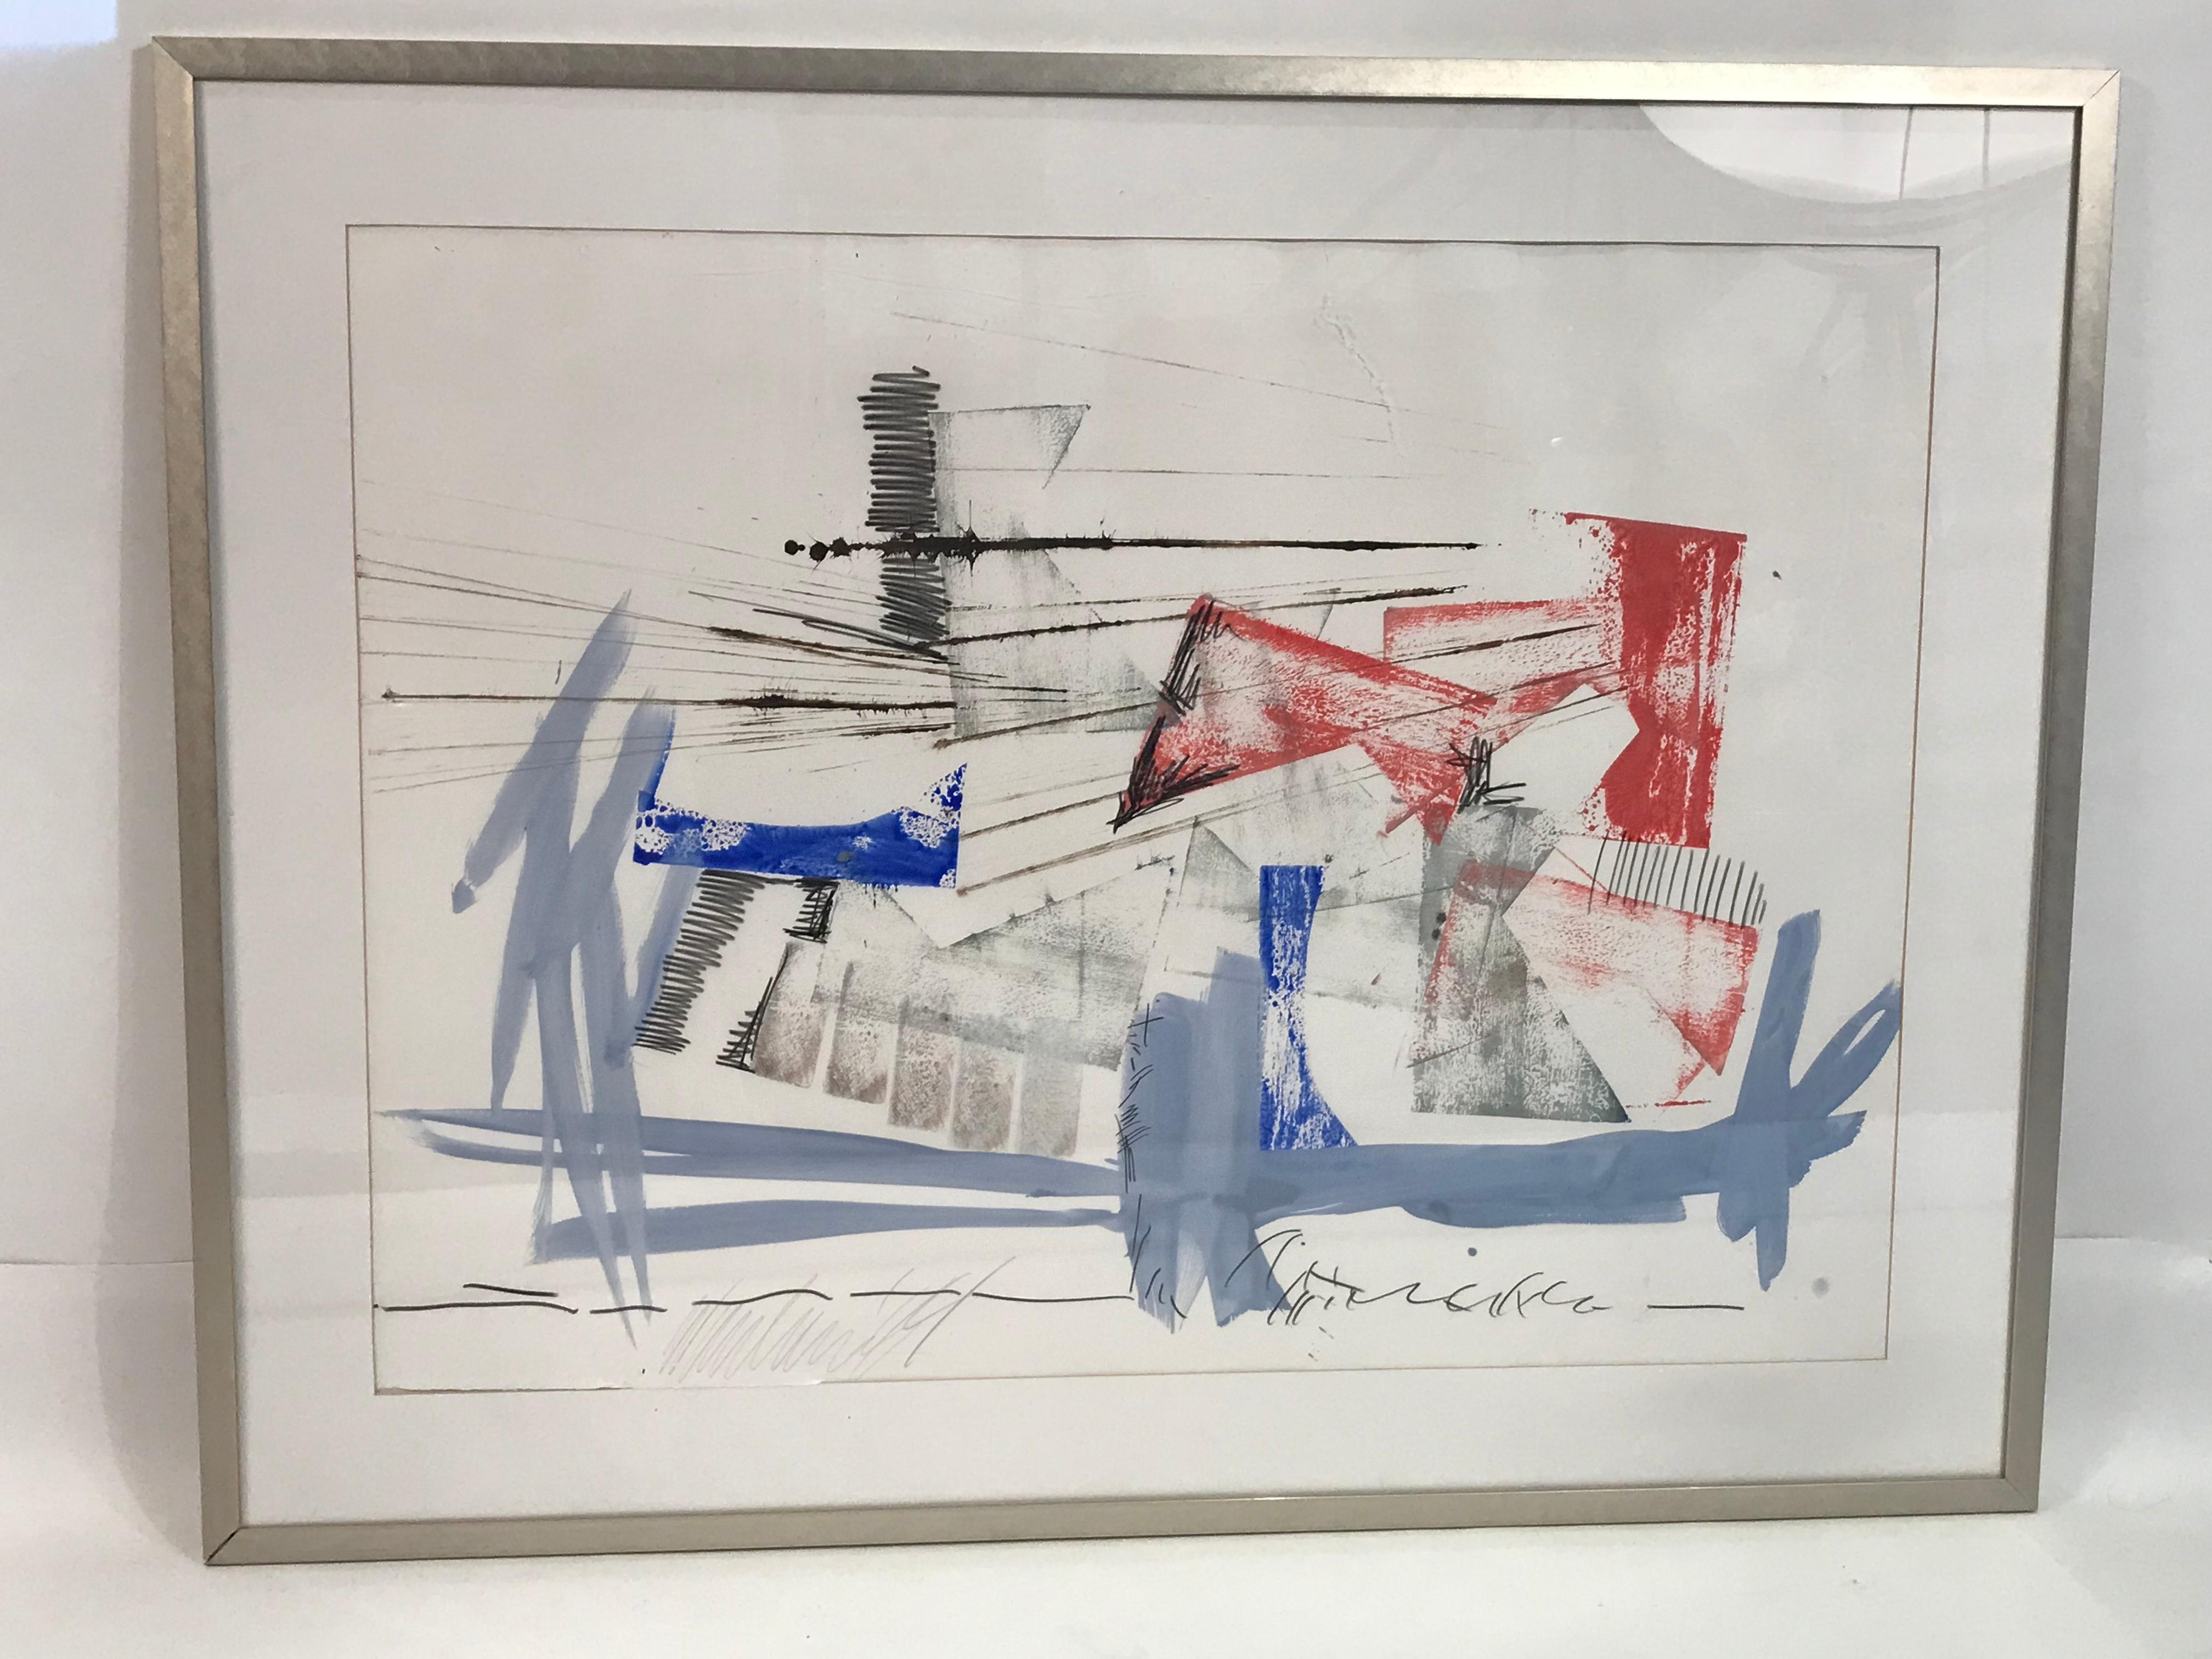 Abstract composition in reds and blues on paper. Technique include print and brush. The image is evocative of an architectural rendering or city landscape.
 

From the art collection of an international corporation. Prior label to the